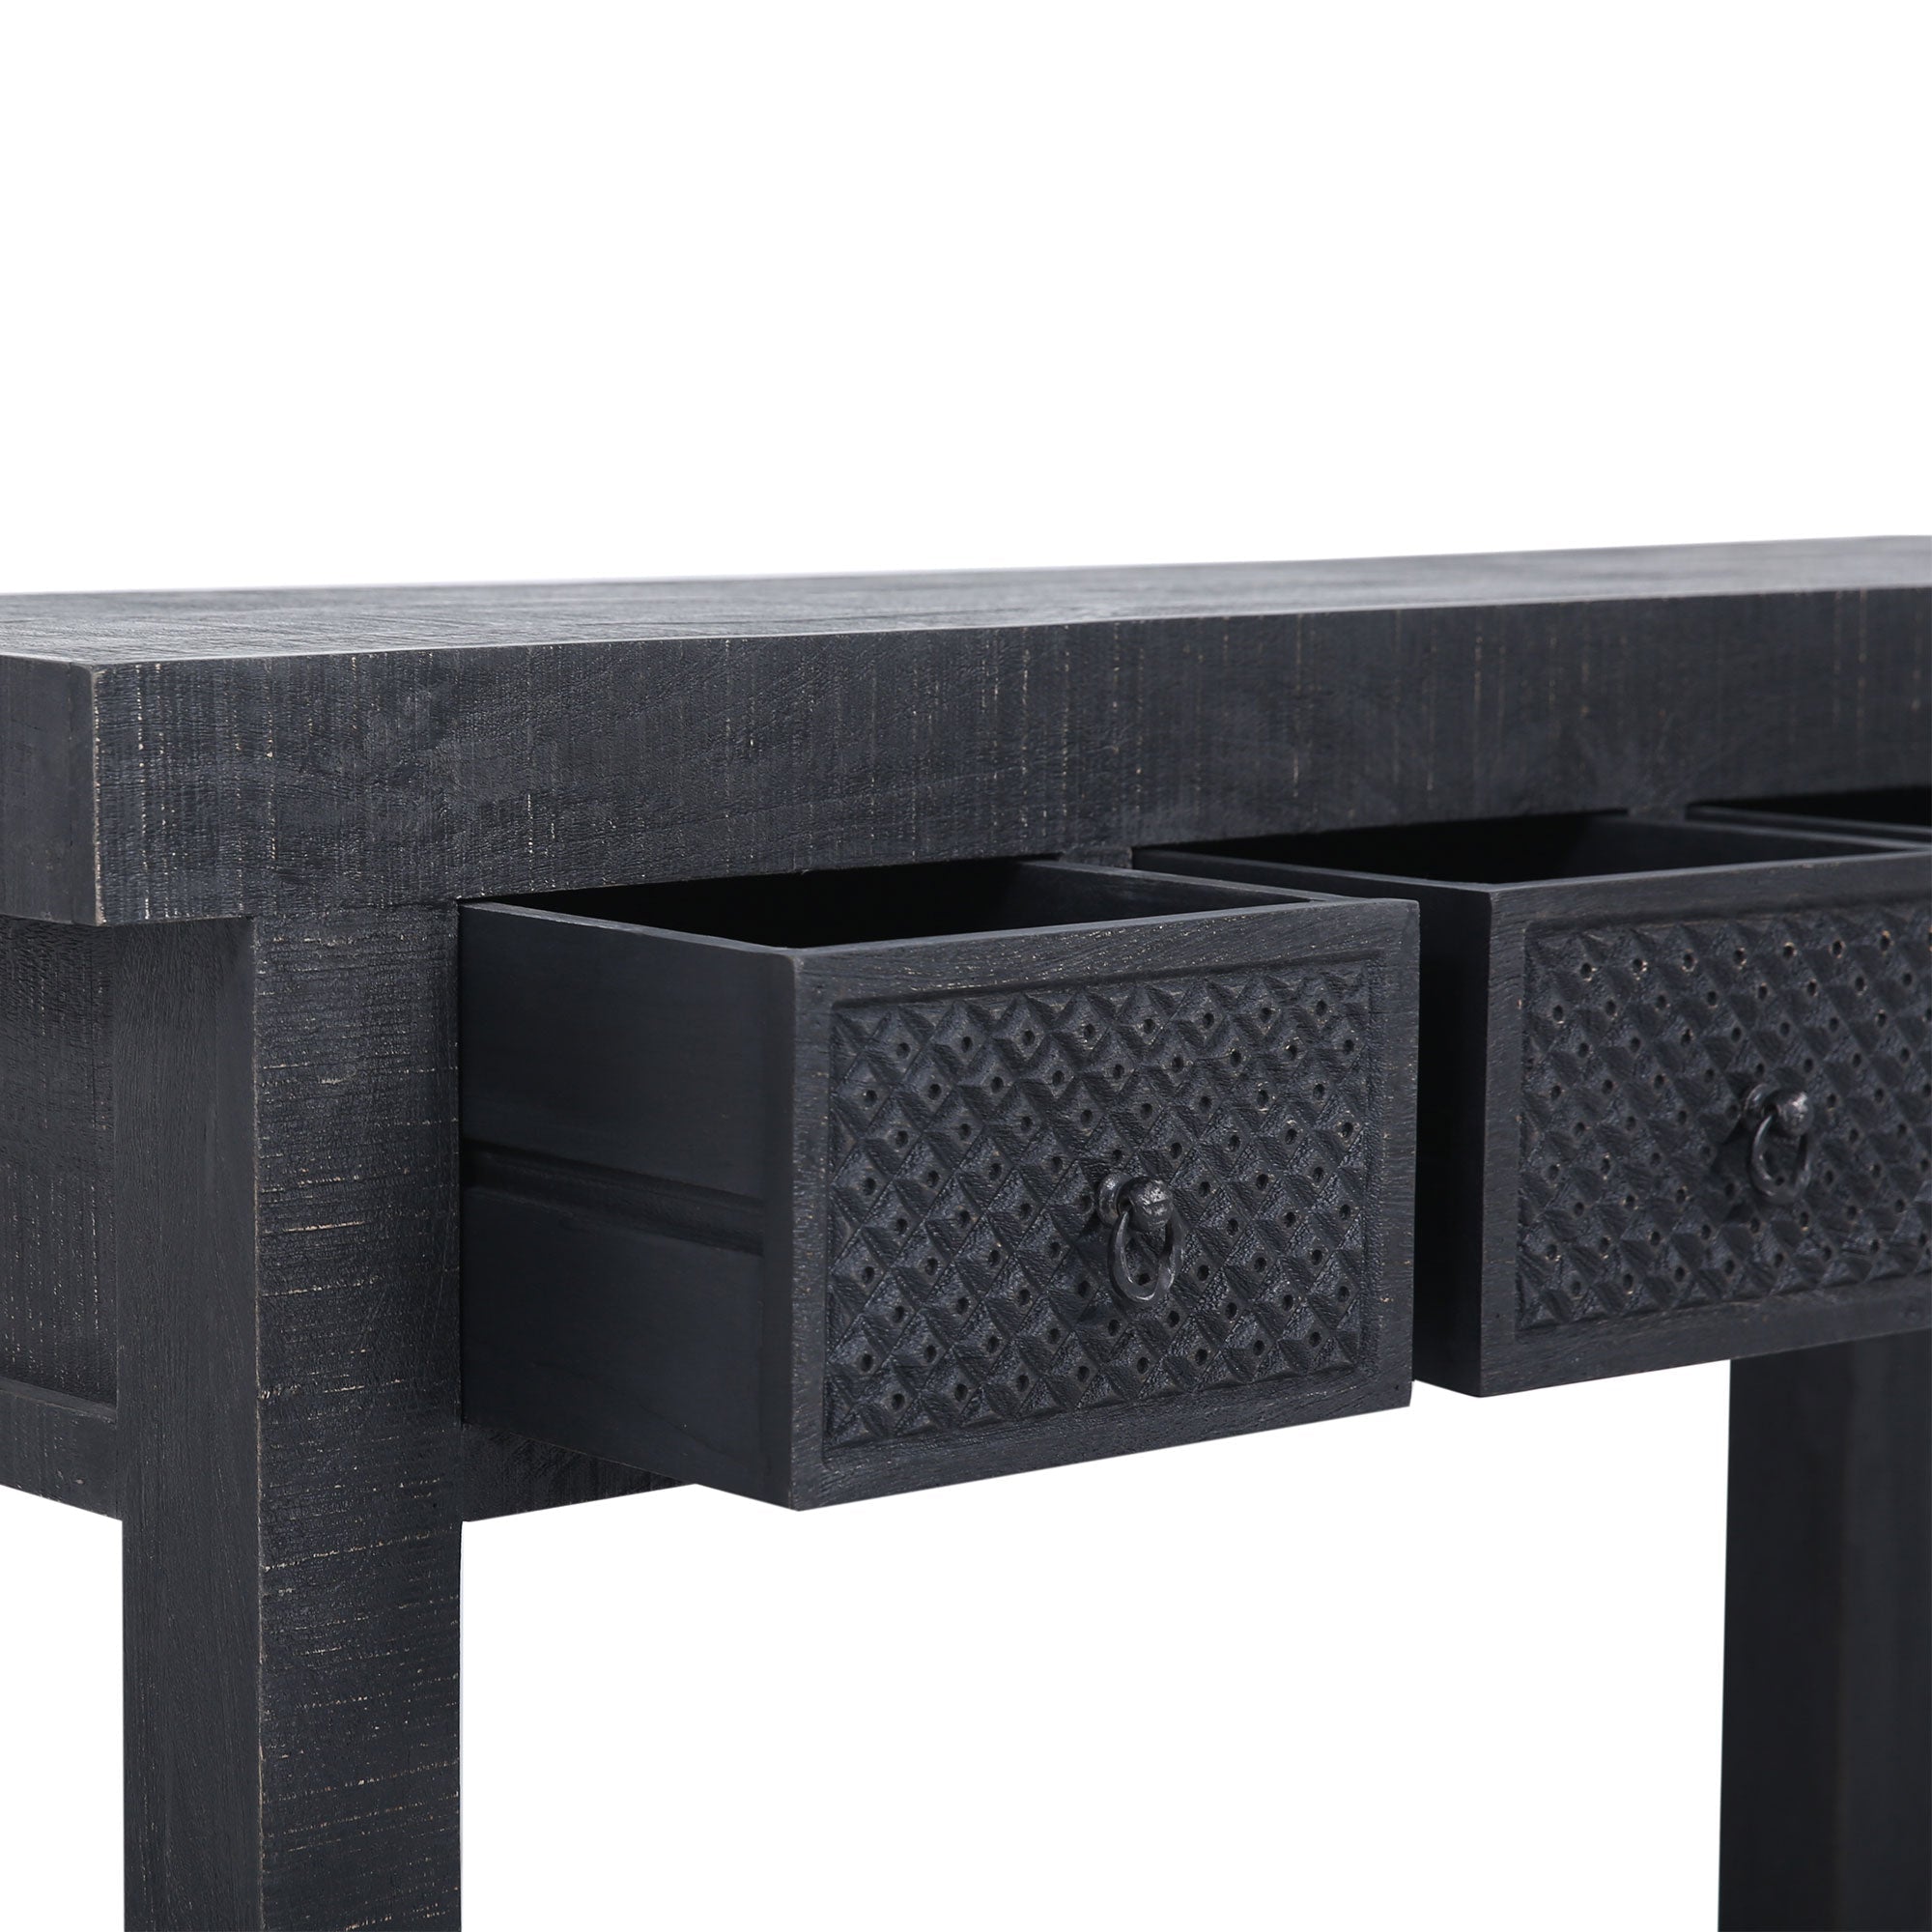 Veena Nomad Wooden Console Table in Distressed Black Finish in Dining Furniture by VMInnovations